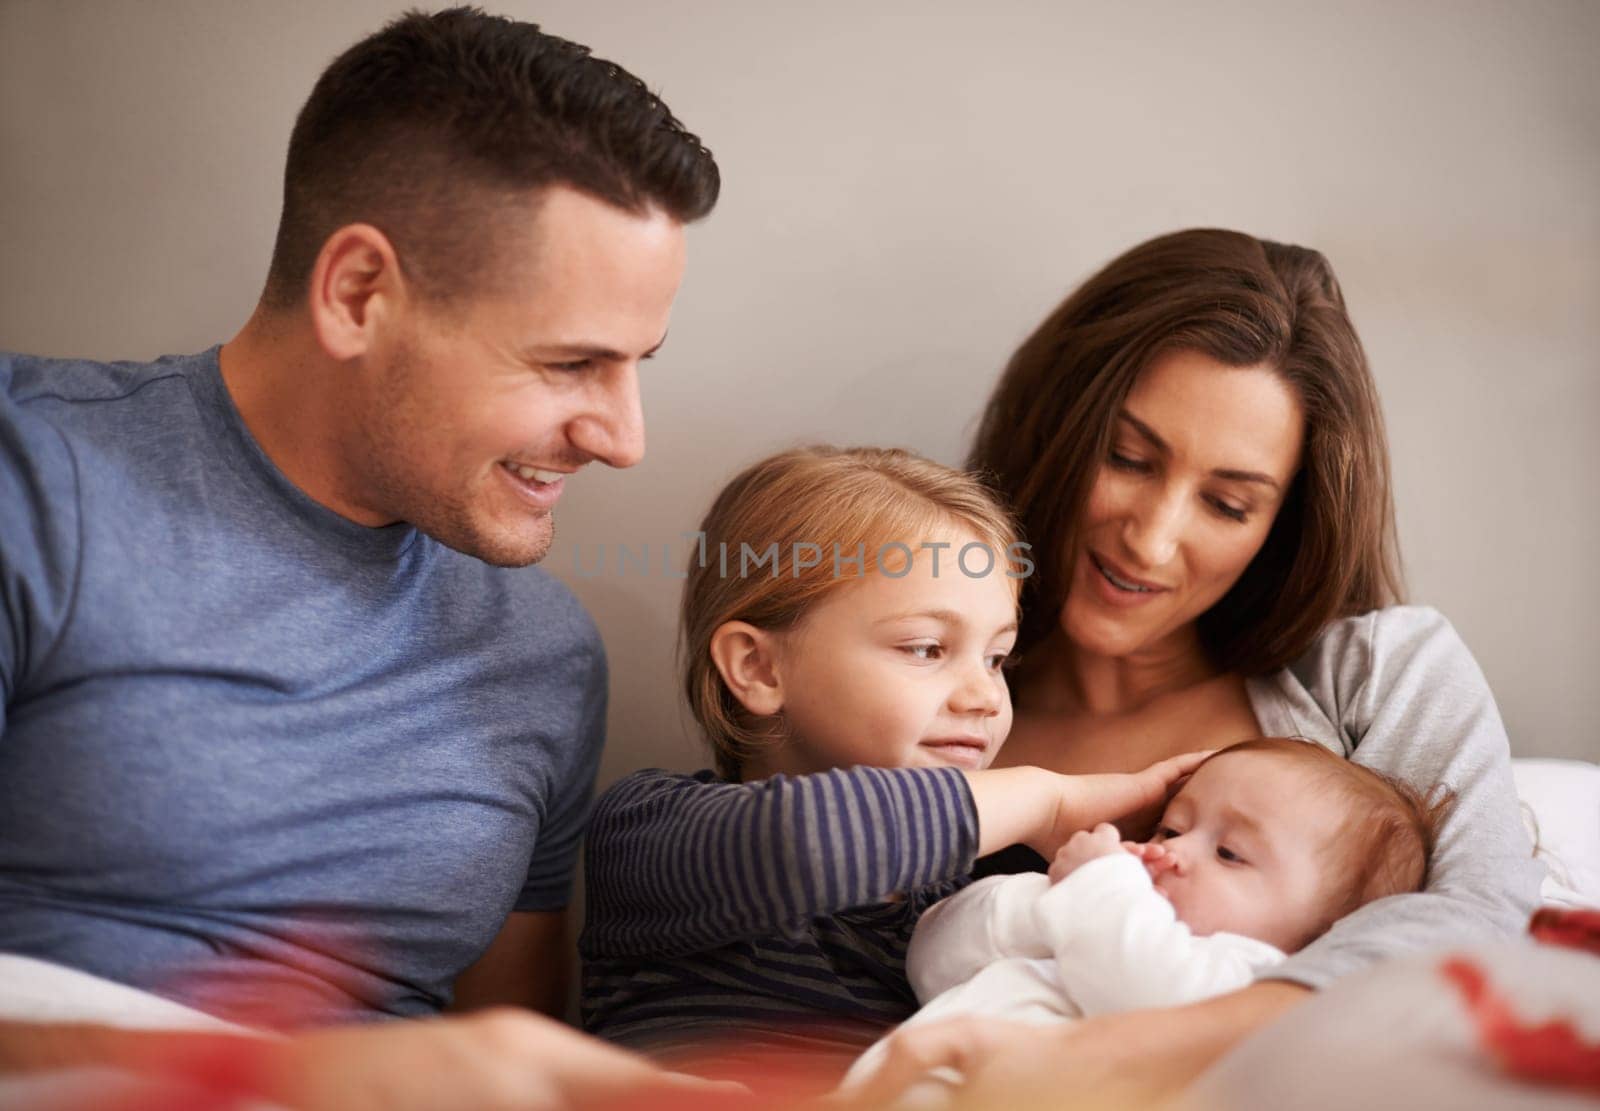 Home, family and parents with baby, kids and bonding together with happiness and care in the morning. Bedroom, mother and father with children and holding infant with comfort, smile and weekend break by YuriArcurs